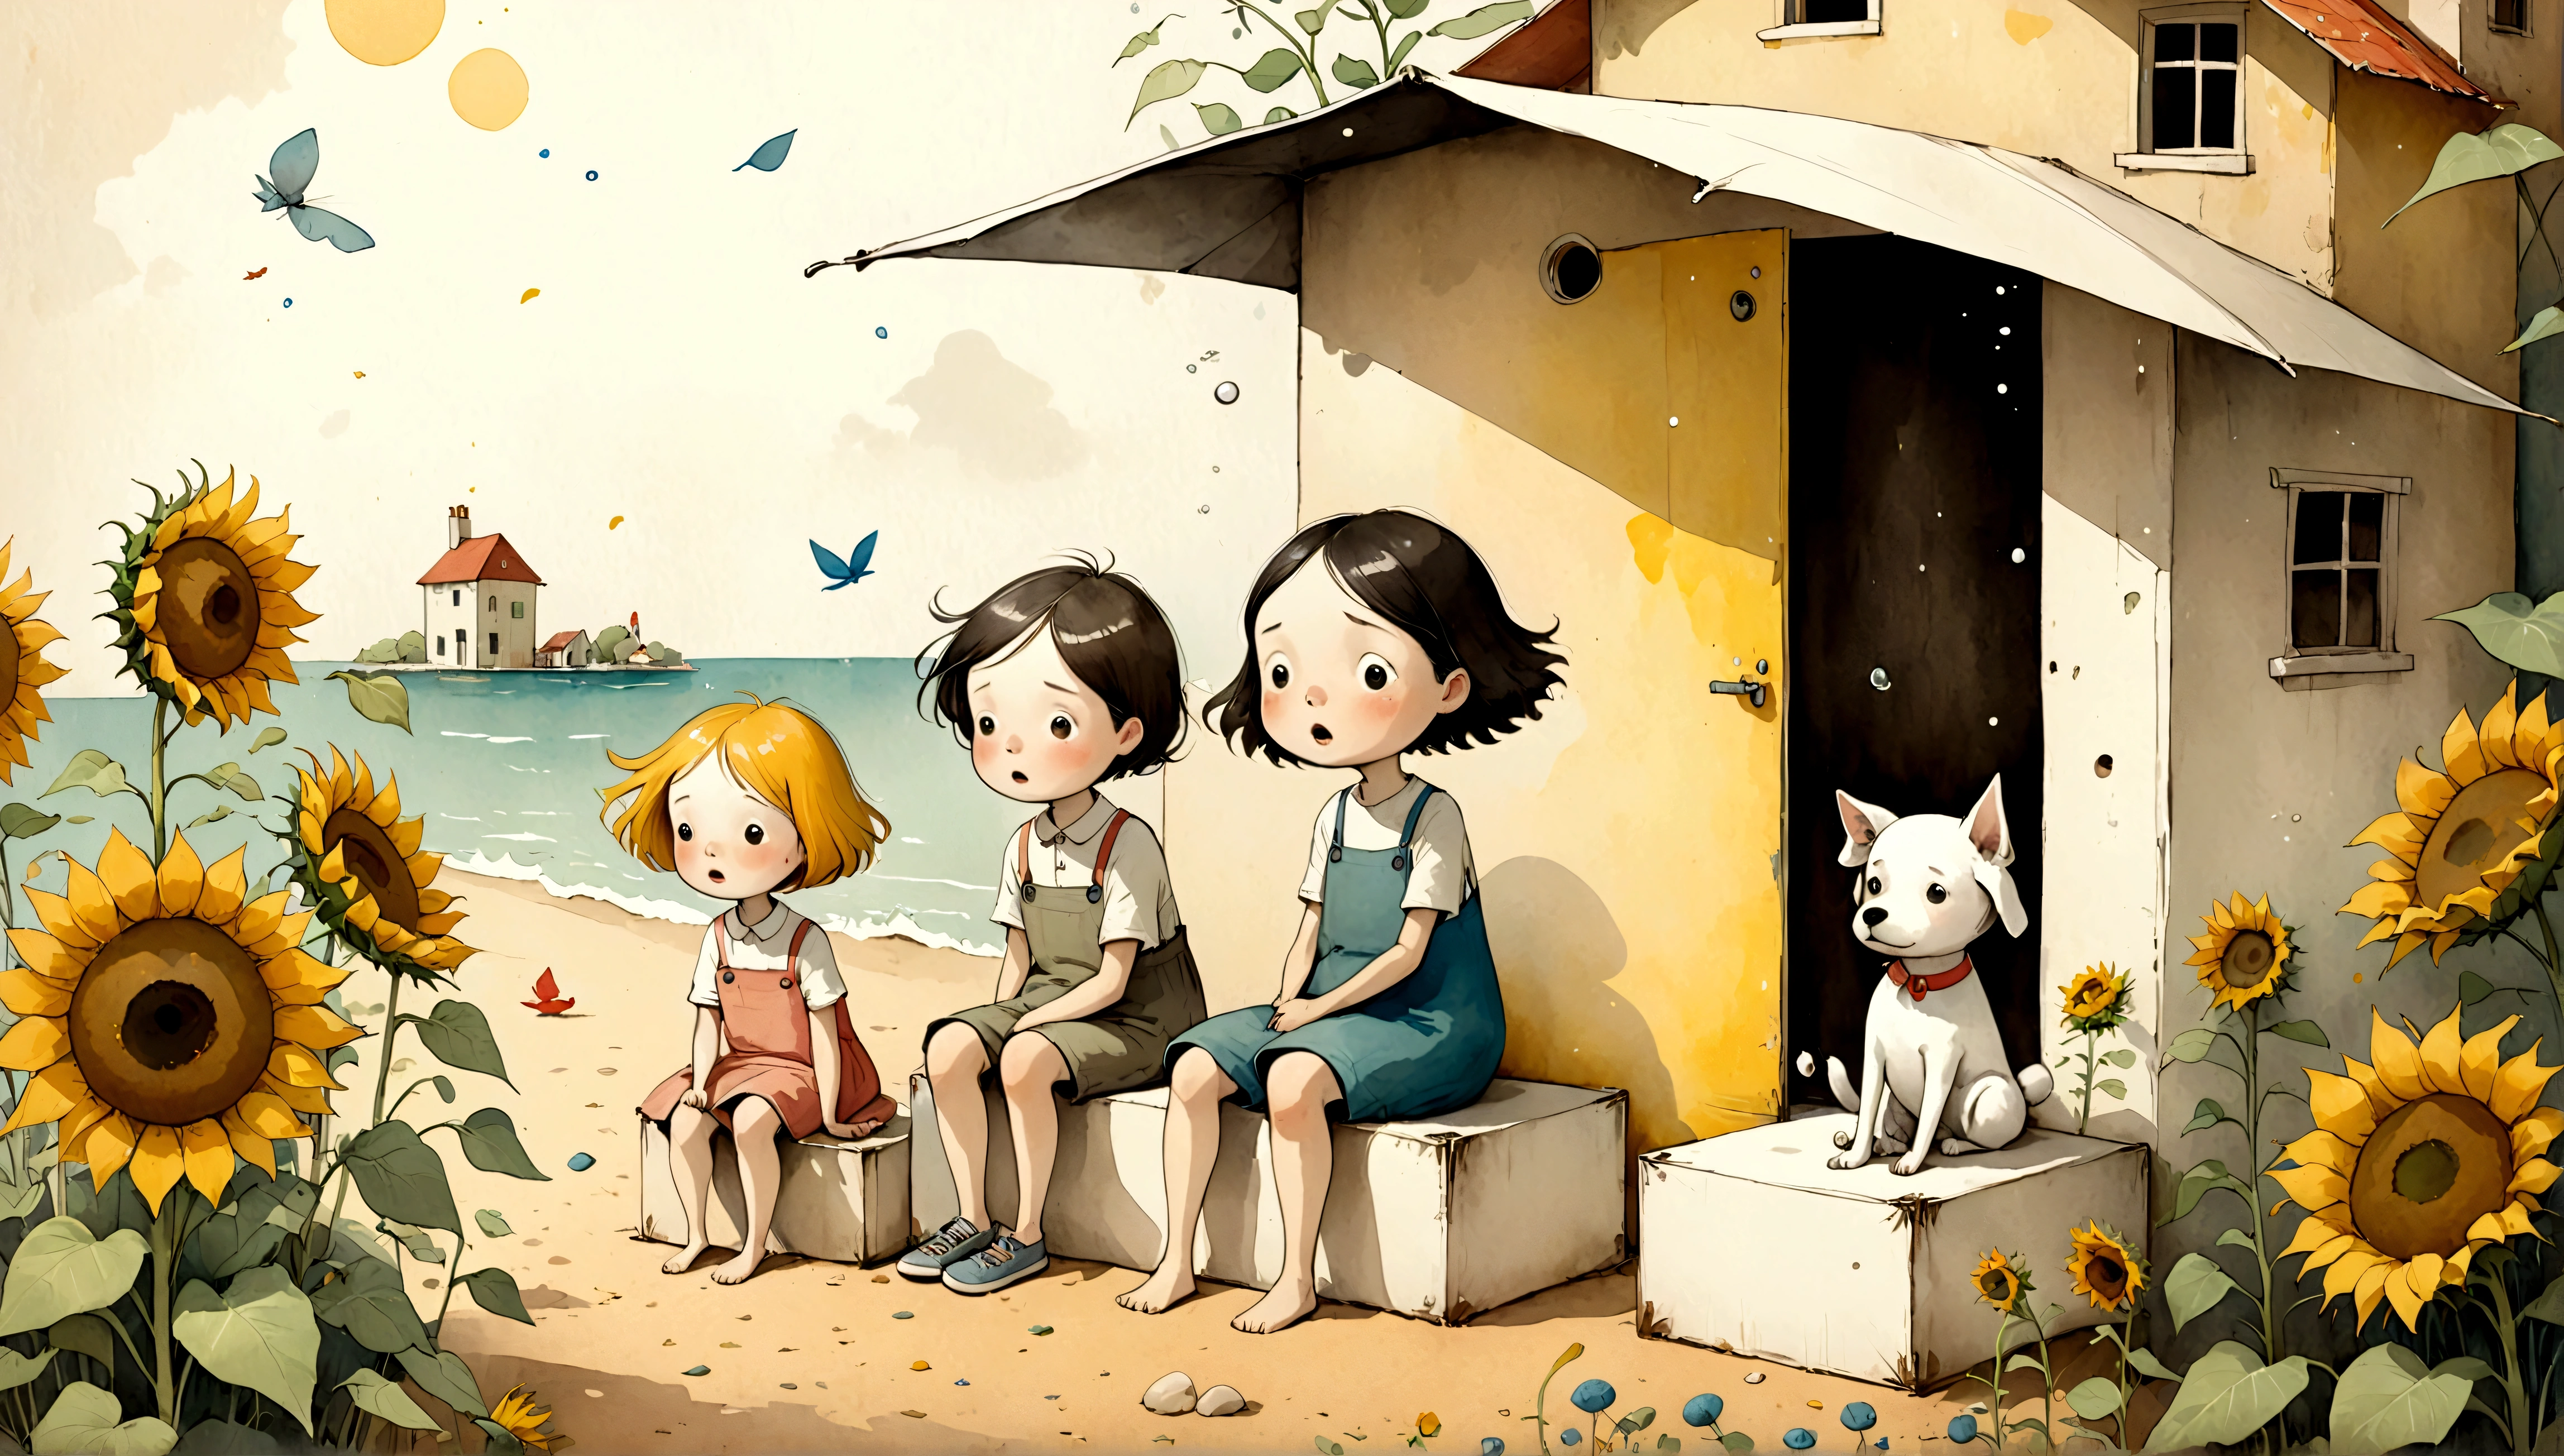 An illustration,Draw children with surprised expressions,Children with open mouths and disappointed expressions,Some children sat down in shock.,children are wearing summer clothes,(The background is the garden of a house),Morning glories and sunflowers are blooming,dog snuggles,BREAK,Children have floats in their hands,There are also cooler boxes and folded beach umbrellas.,BREAK,cute illustration,surreal,artwork,Expressively,This is an illustration that looks like a picture book illustration.,draw with thick lines,Please draw with a gentle touch,Draw with pencil and watercolors,Gabriel Pacheco Style page